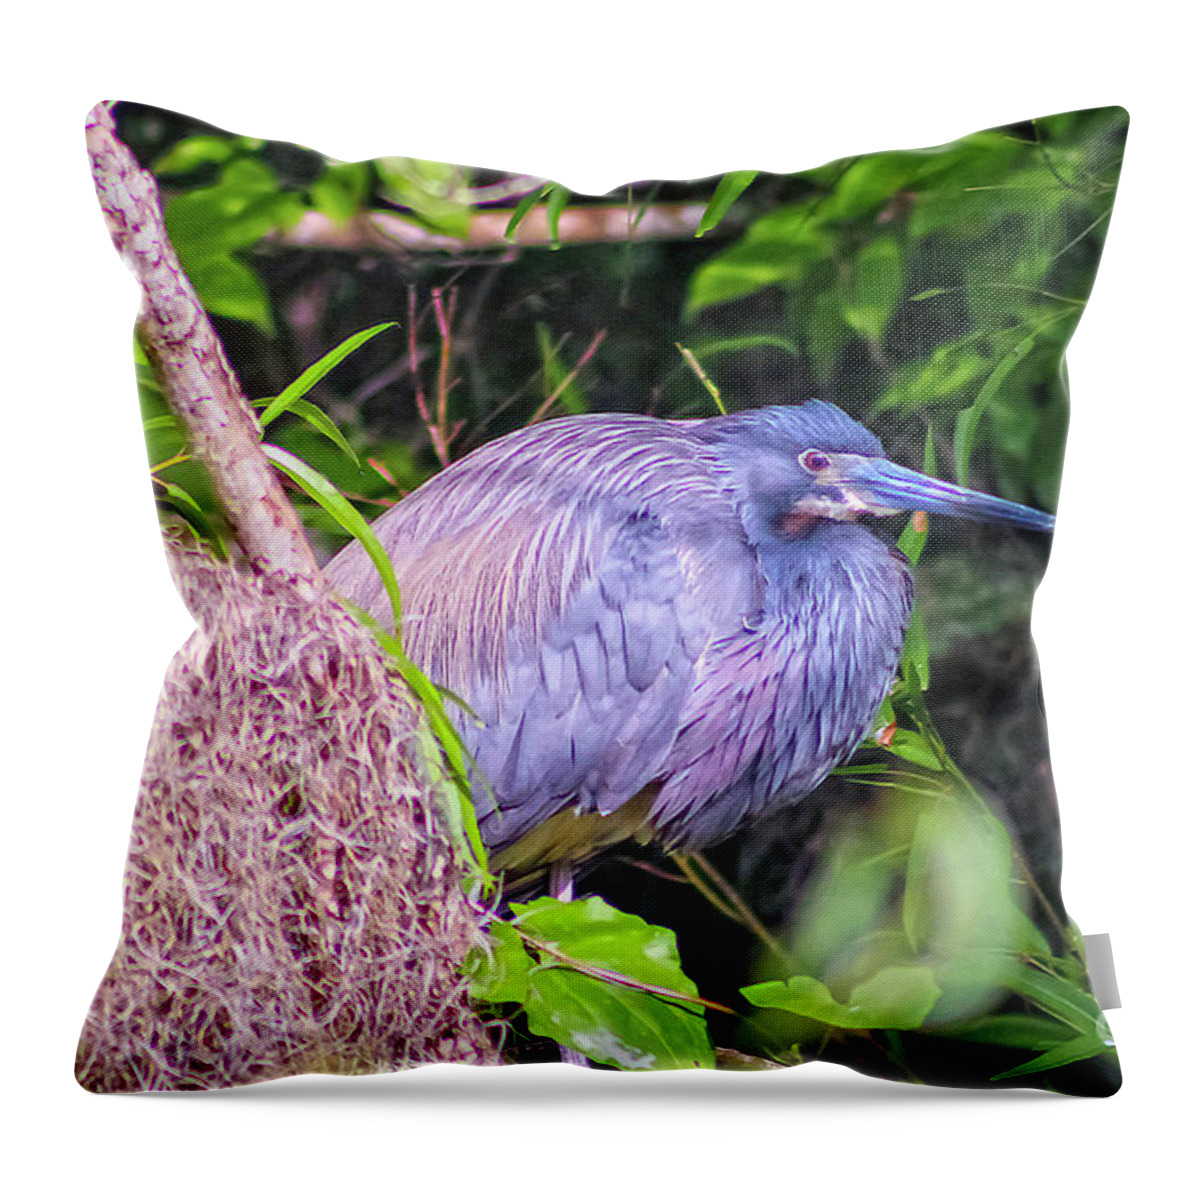 Nature Throw Pillow featuring the photograph Baby Great Blue Heron - Ardea Herodias by DB Hayes